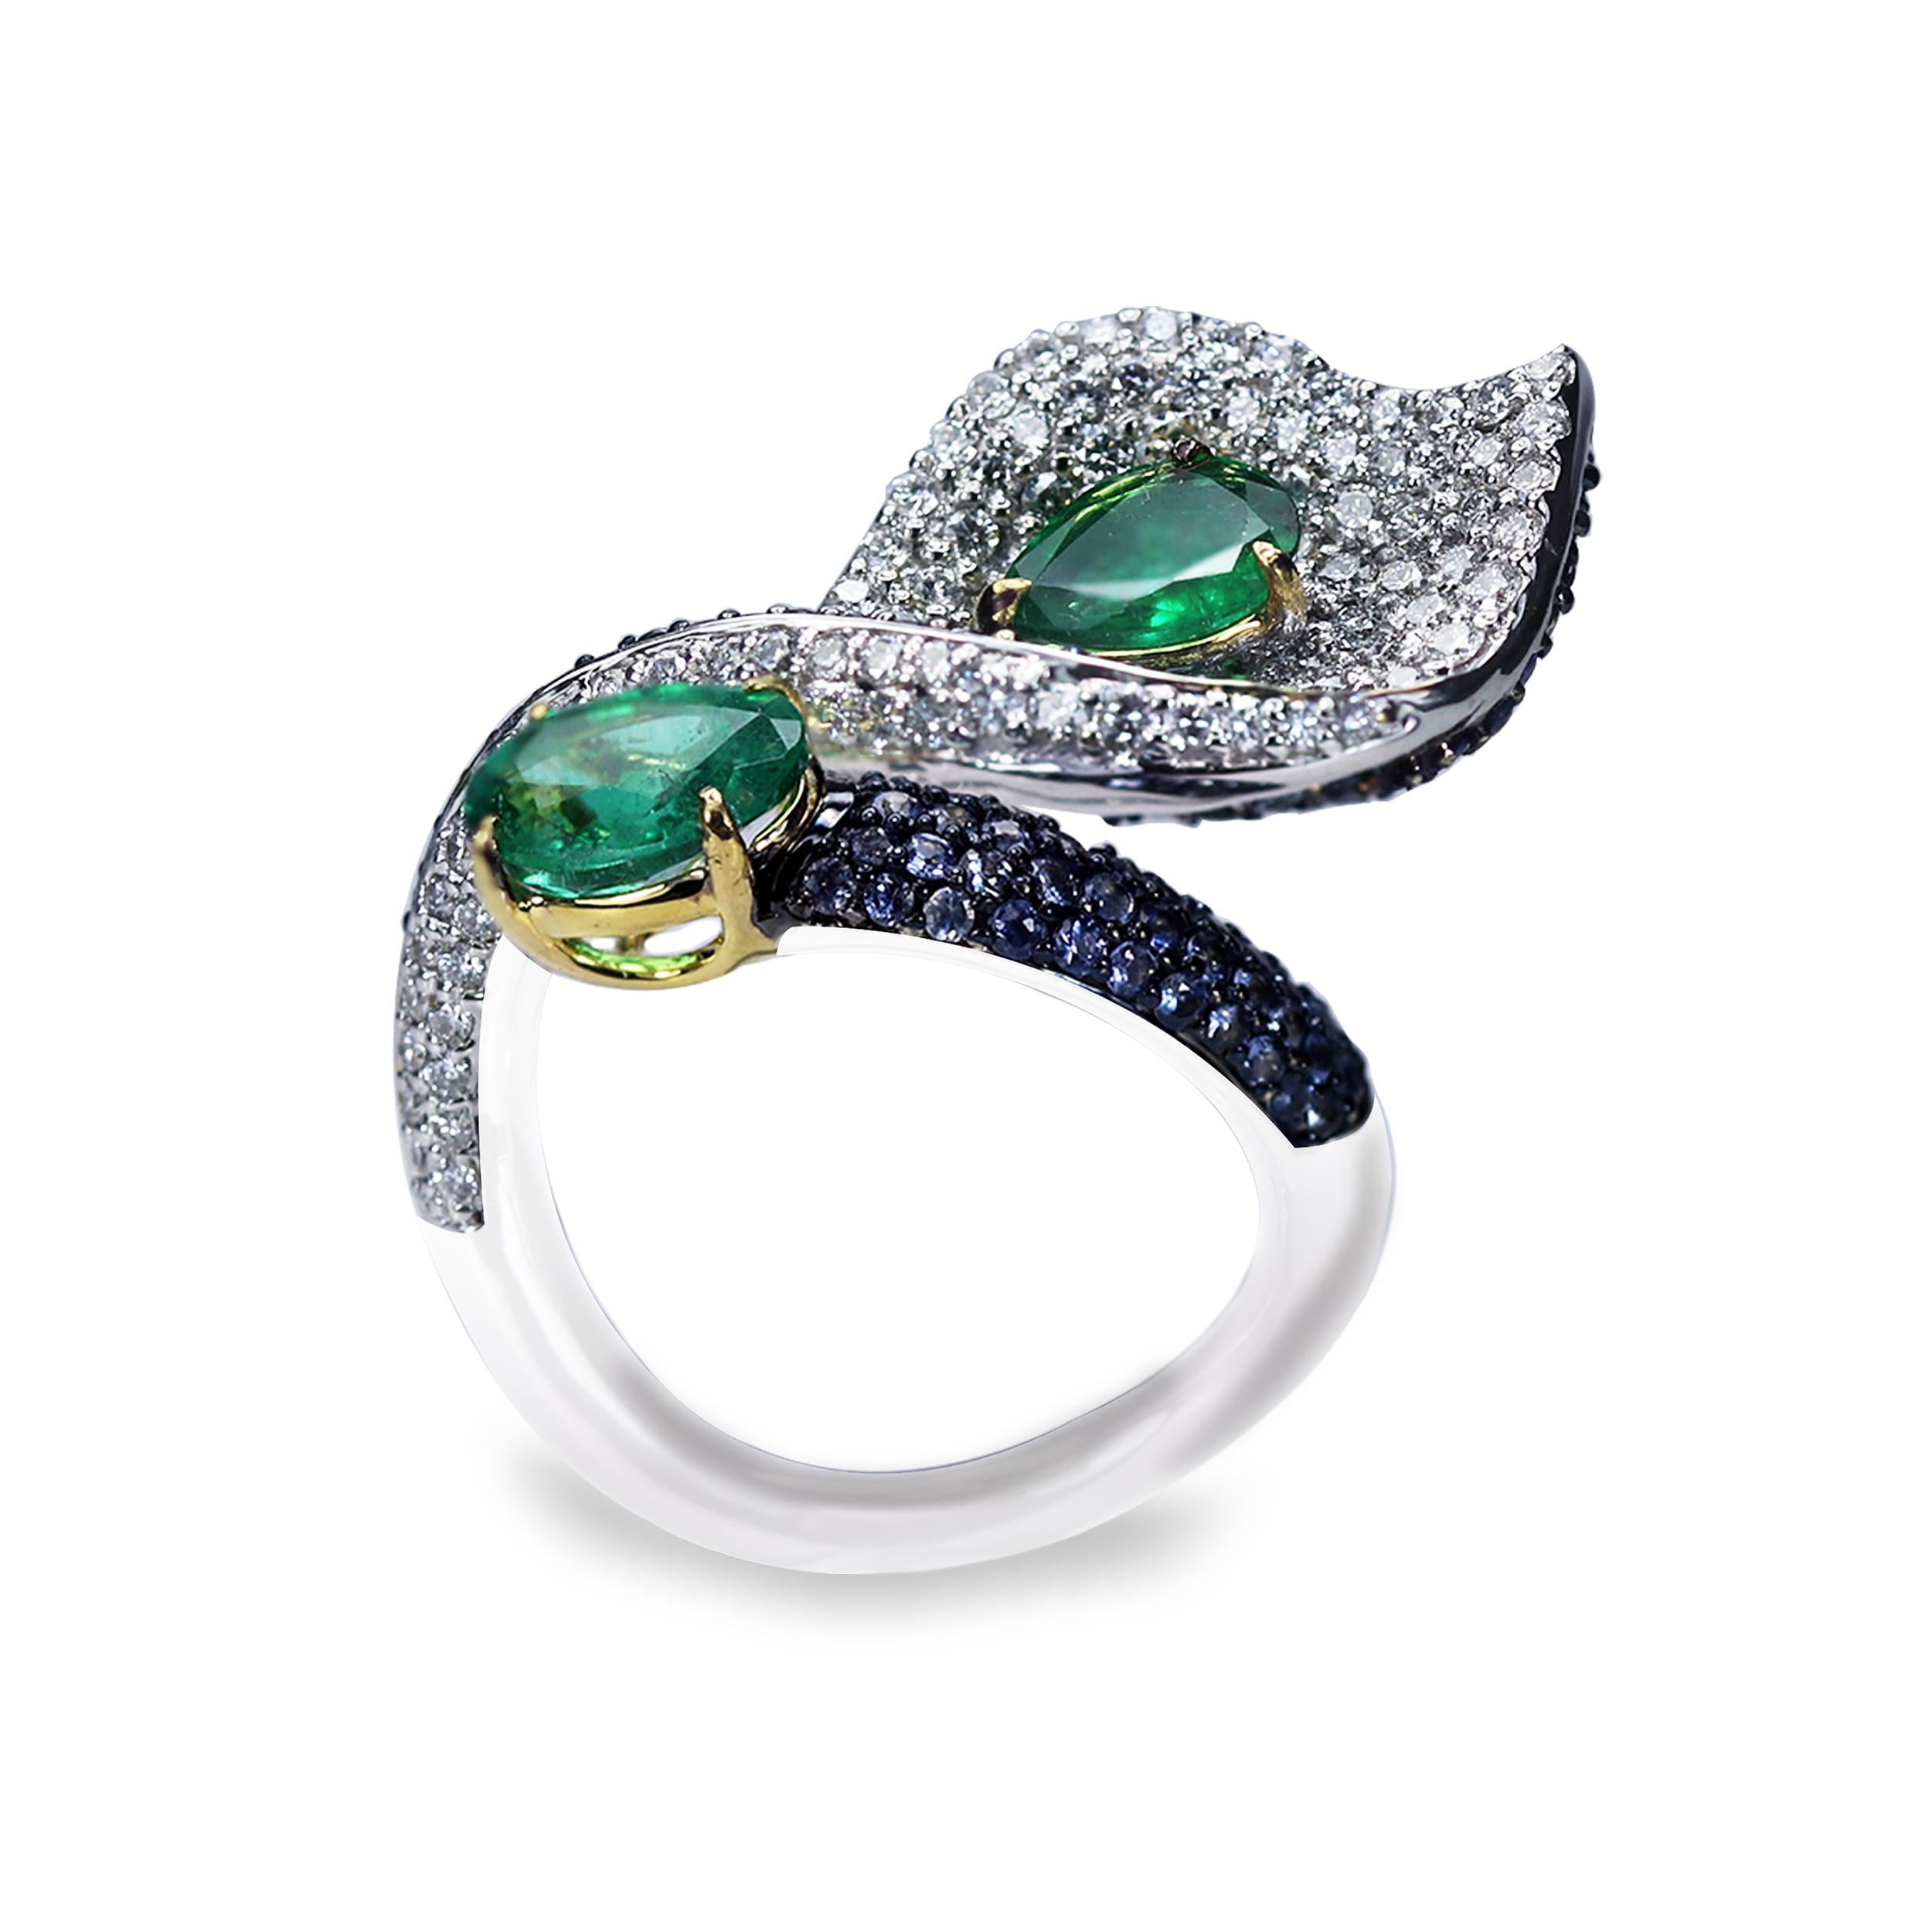 F-G/ SI diamonds, emeralds and blue sapphire ring 

This show-stopping cocktail ring is made even more stand out with the playful swirls of stones that seamlessly flow into the next. The epitome of fluidity meets form, this cocktail ring is crafted